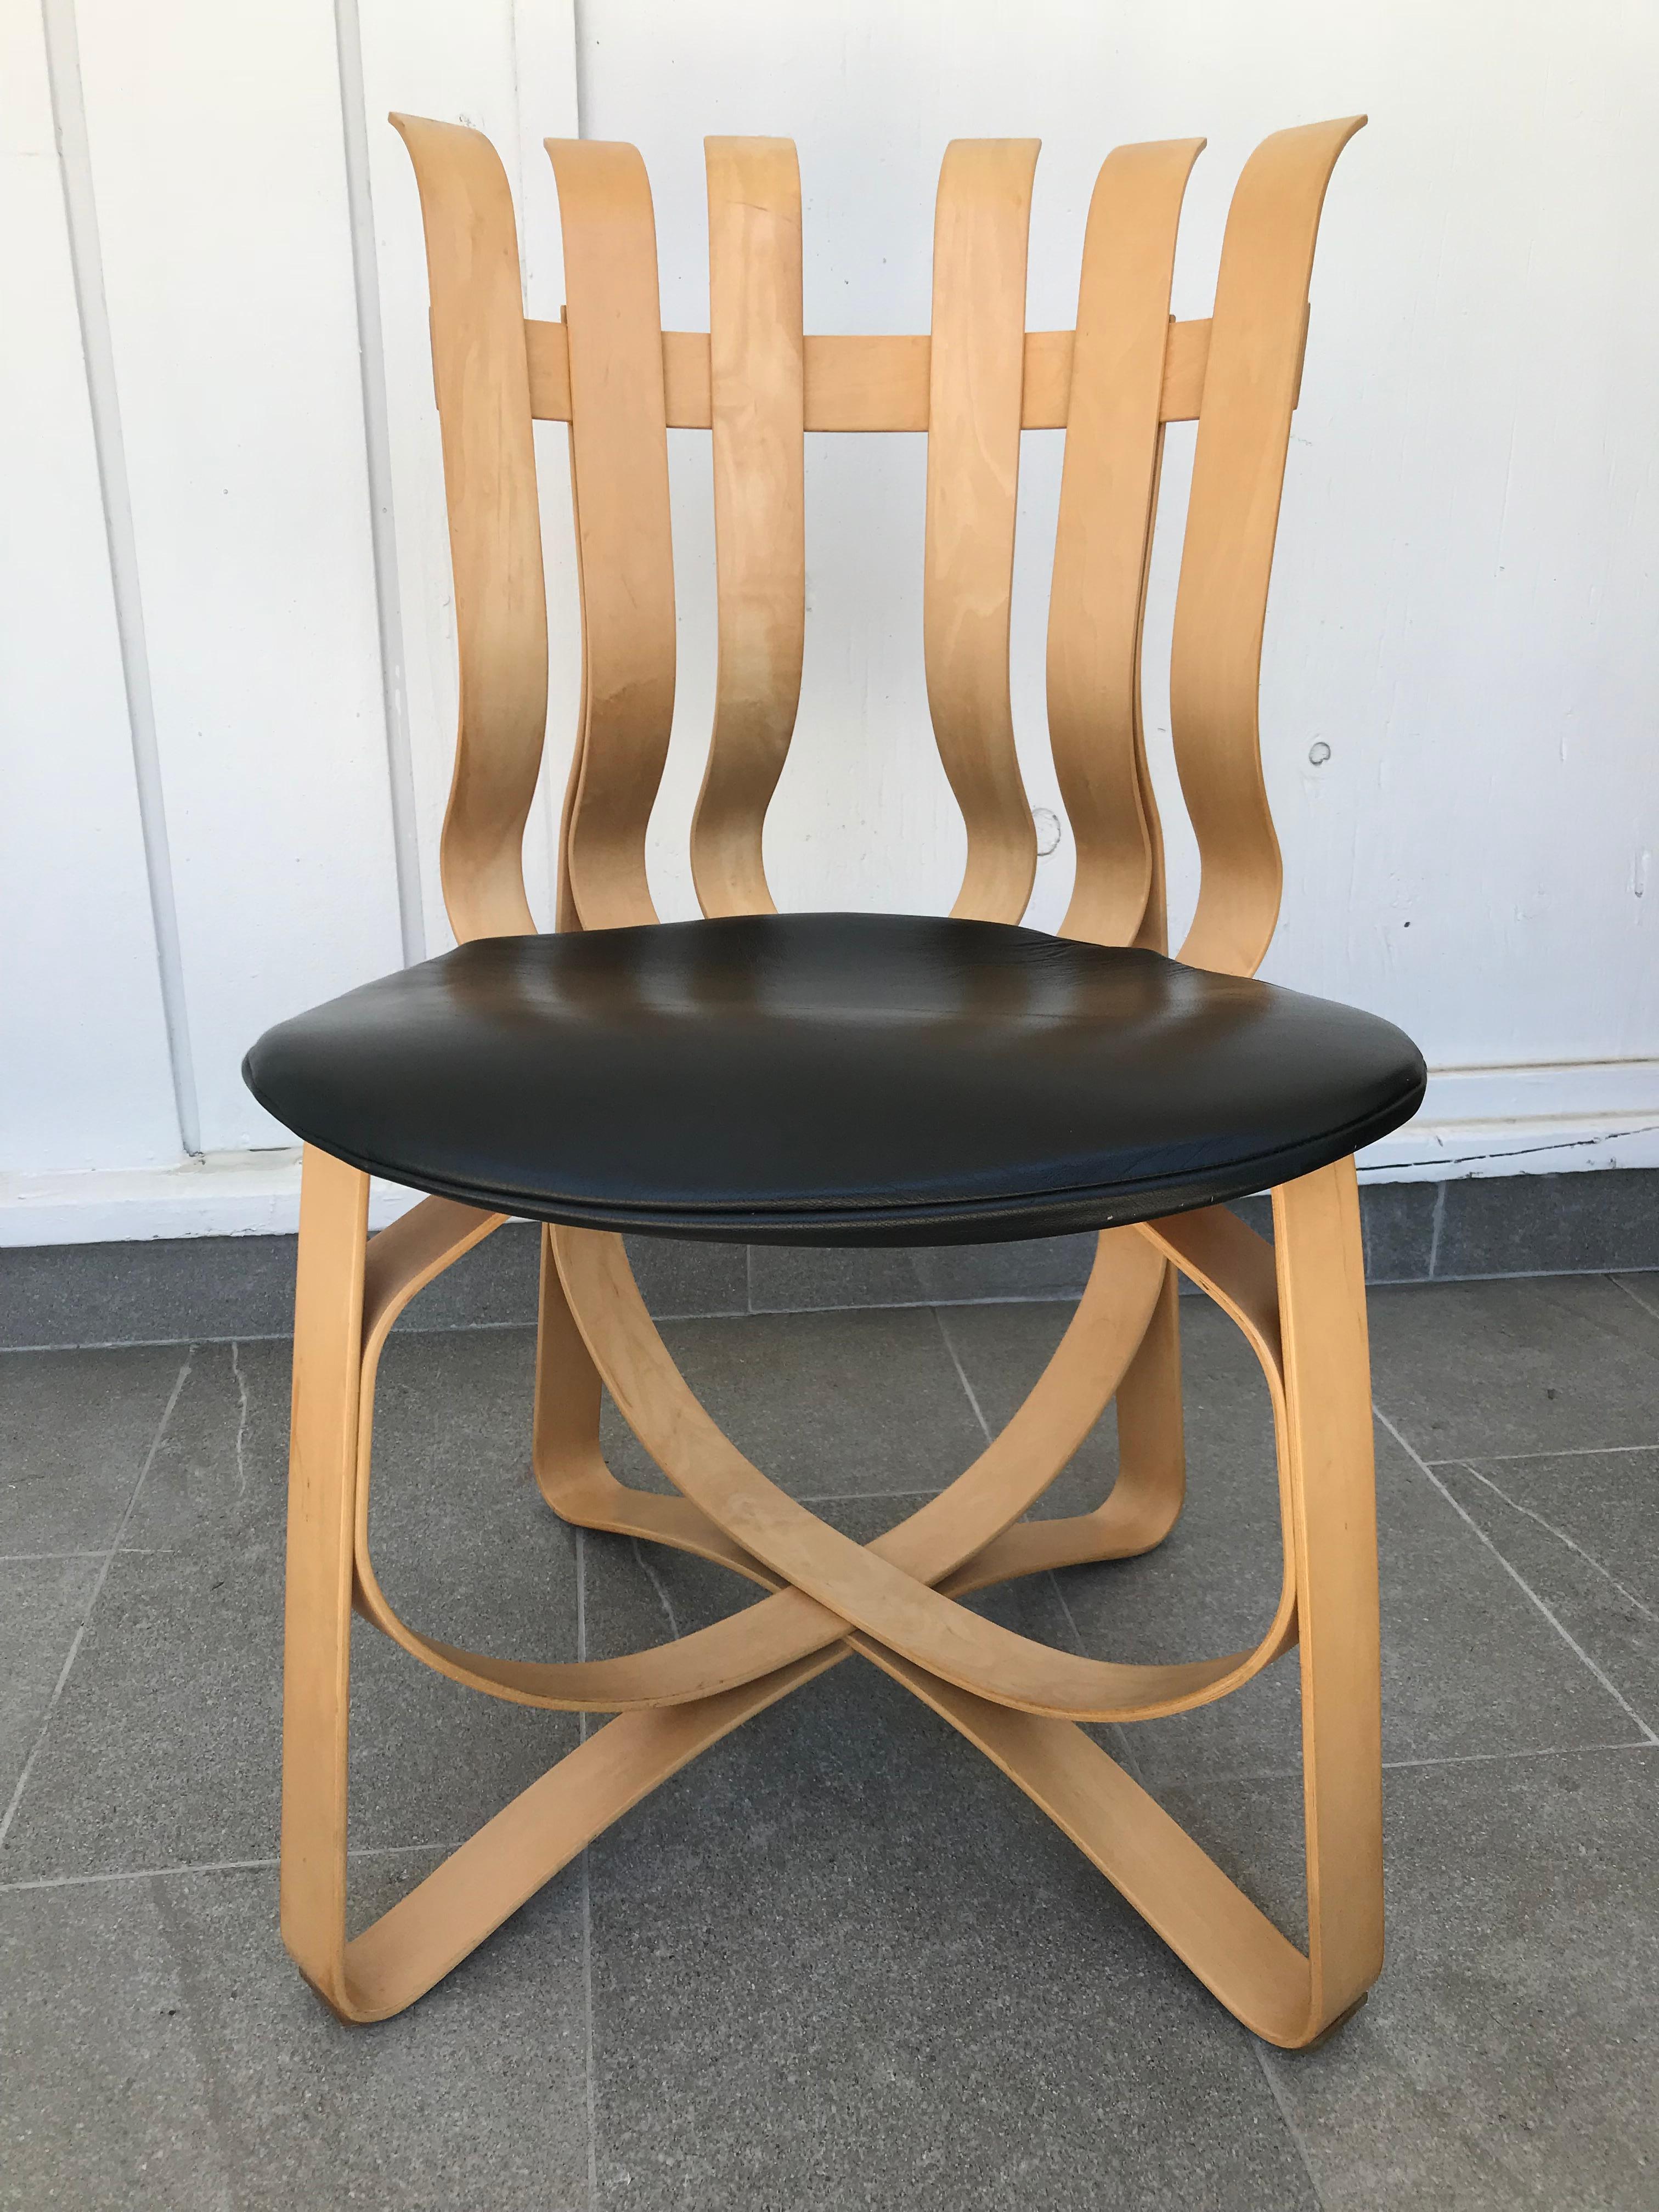 Only the famous architect Frank Gehry could dare to build a chair with slender strips of maple with such an innovative design!
He named them the hat trick chairs and that has been a really good hat-trick!
They look so beautiful and precious that